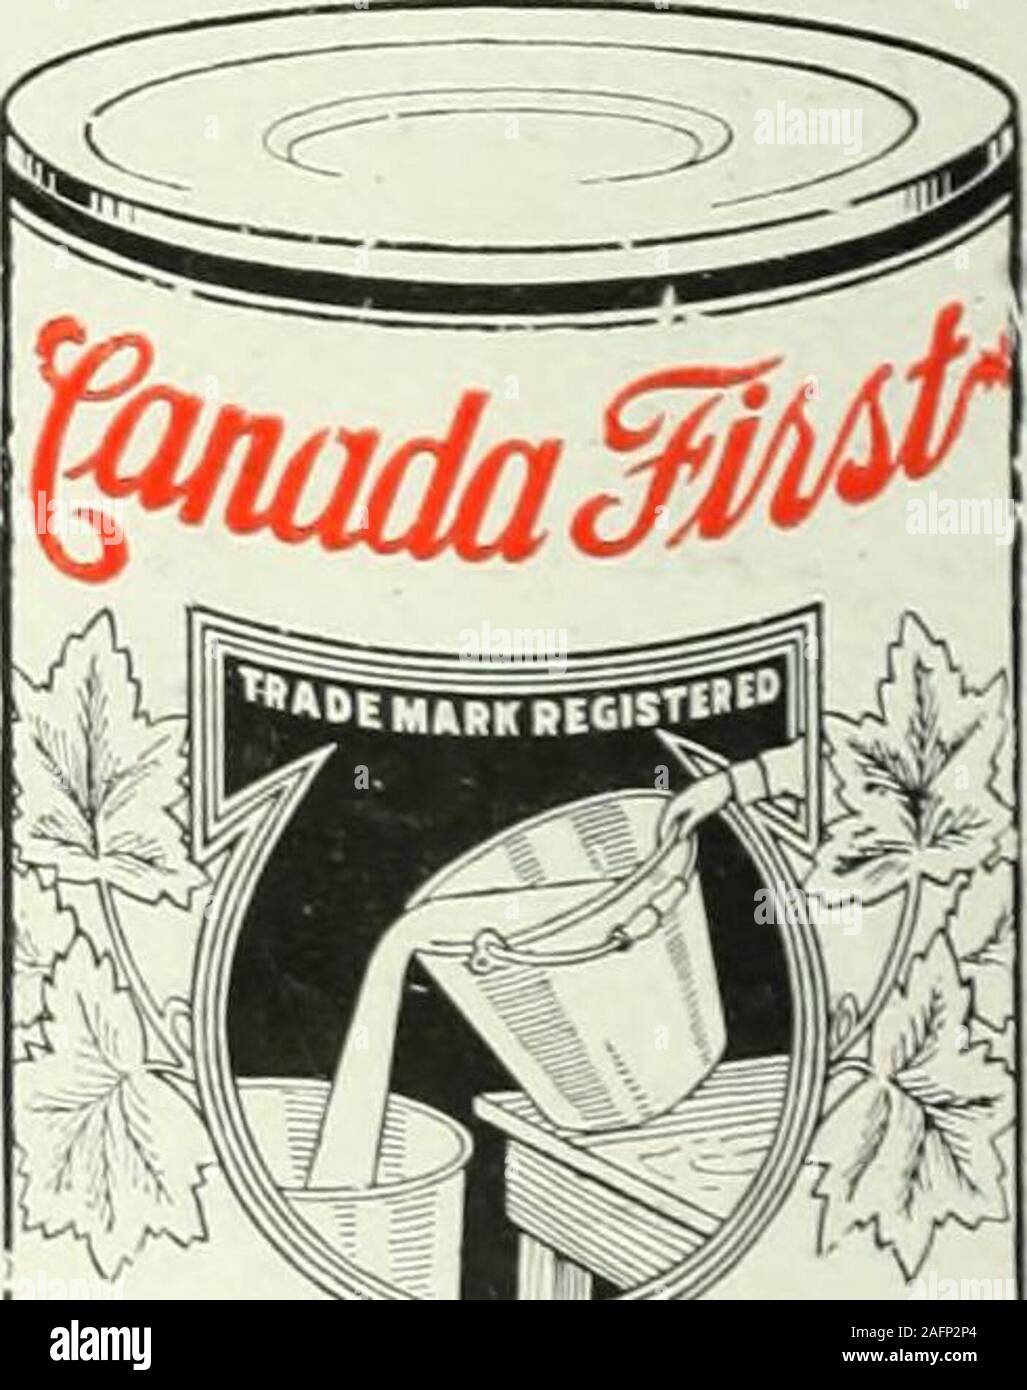 . Canadian grocer January-March 1918. Government Bulletin No. 305, issued in 1915. This popu-lar brand of evaporated milk is used for every milk use by thousands of house-wives throughout the Dominion. Your jobber has these brands, or can get them for you. For store advertising material and information write to our nearest repre-sentative listed below: D. Stewart Robertson & Sons, Kingston, Ont. R. S. Mclndoe. Toronto, Ont. H. D. Marshall, Ottawa, Ont. John Bickle & Greening, Hamilton, Ont. J. Harley Brown, London, Ont. J. Hunter White, St. John. N.B. Rose & Laflamme, Montreal, Que. Dastous & Stock Photo